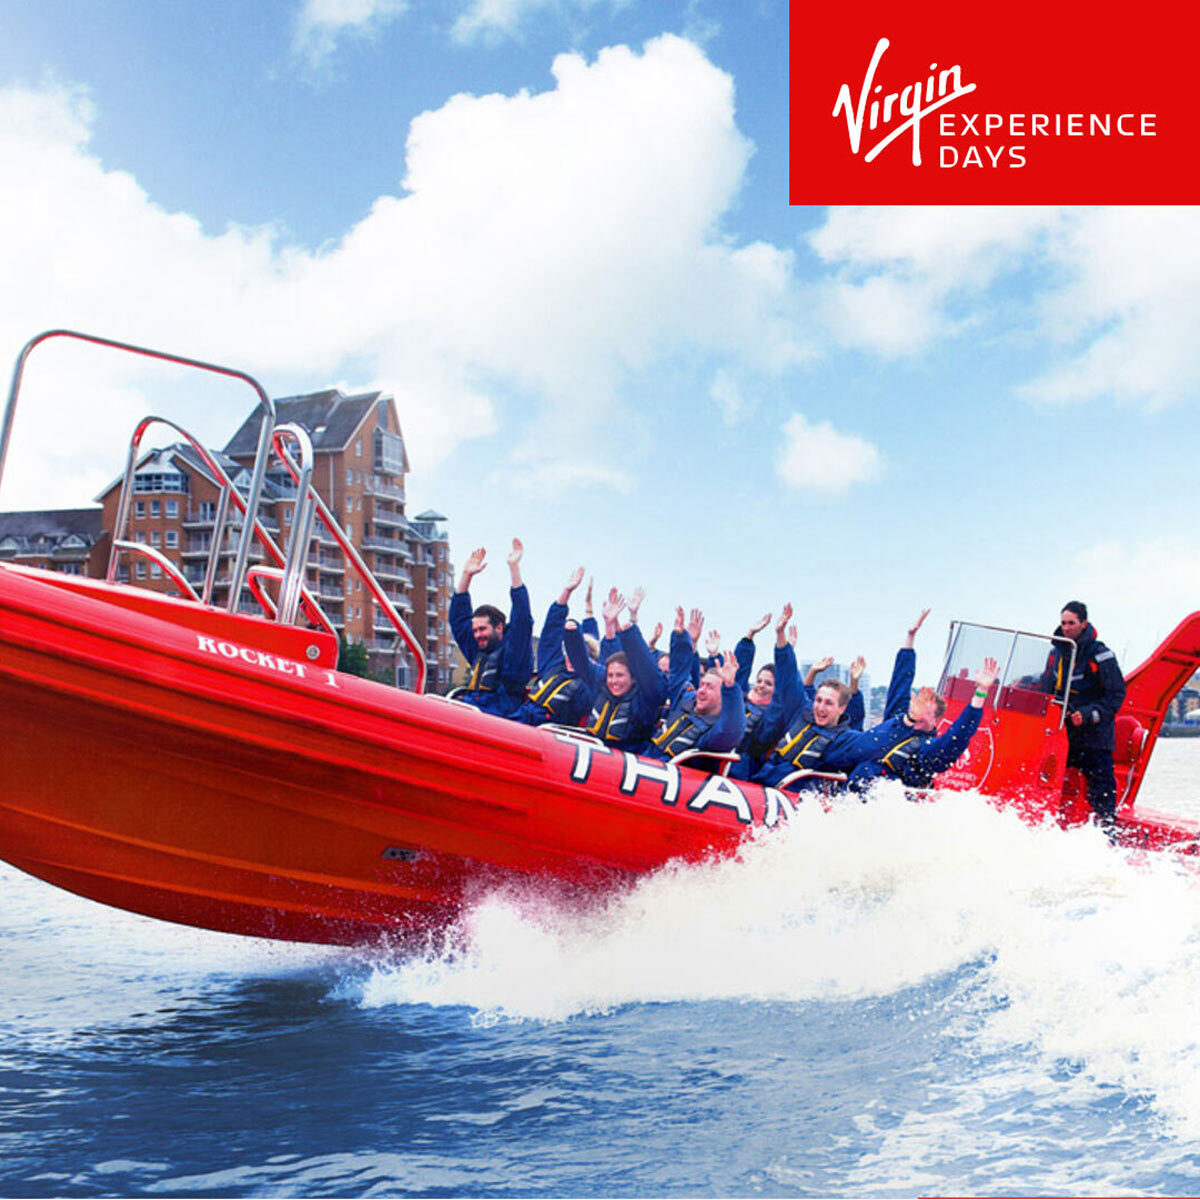 Buy Virgin Experience Thames Rockets Private Group Speedboat Ride Image1 at Costco.co.uk